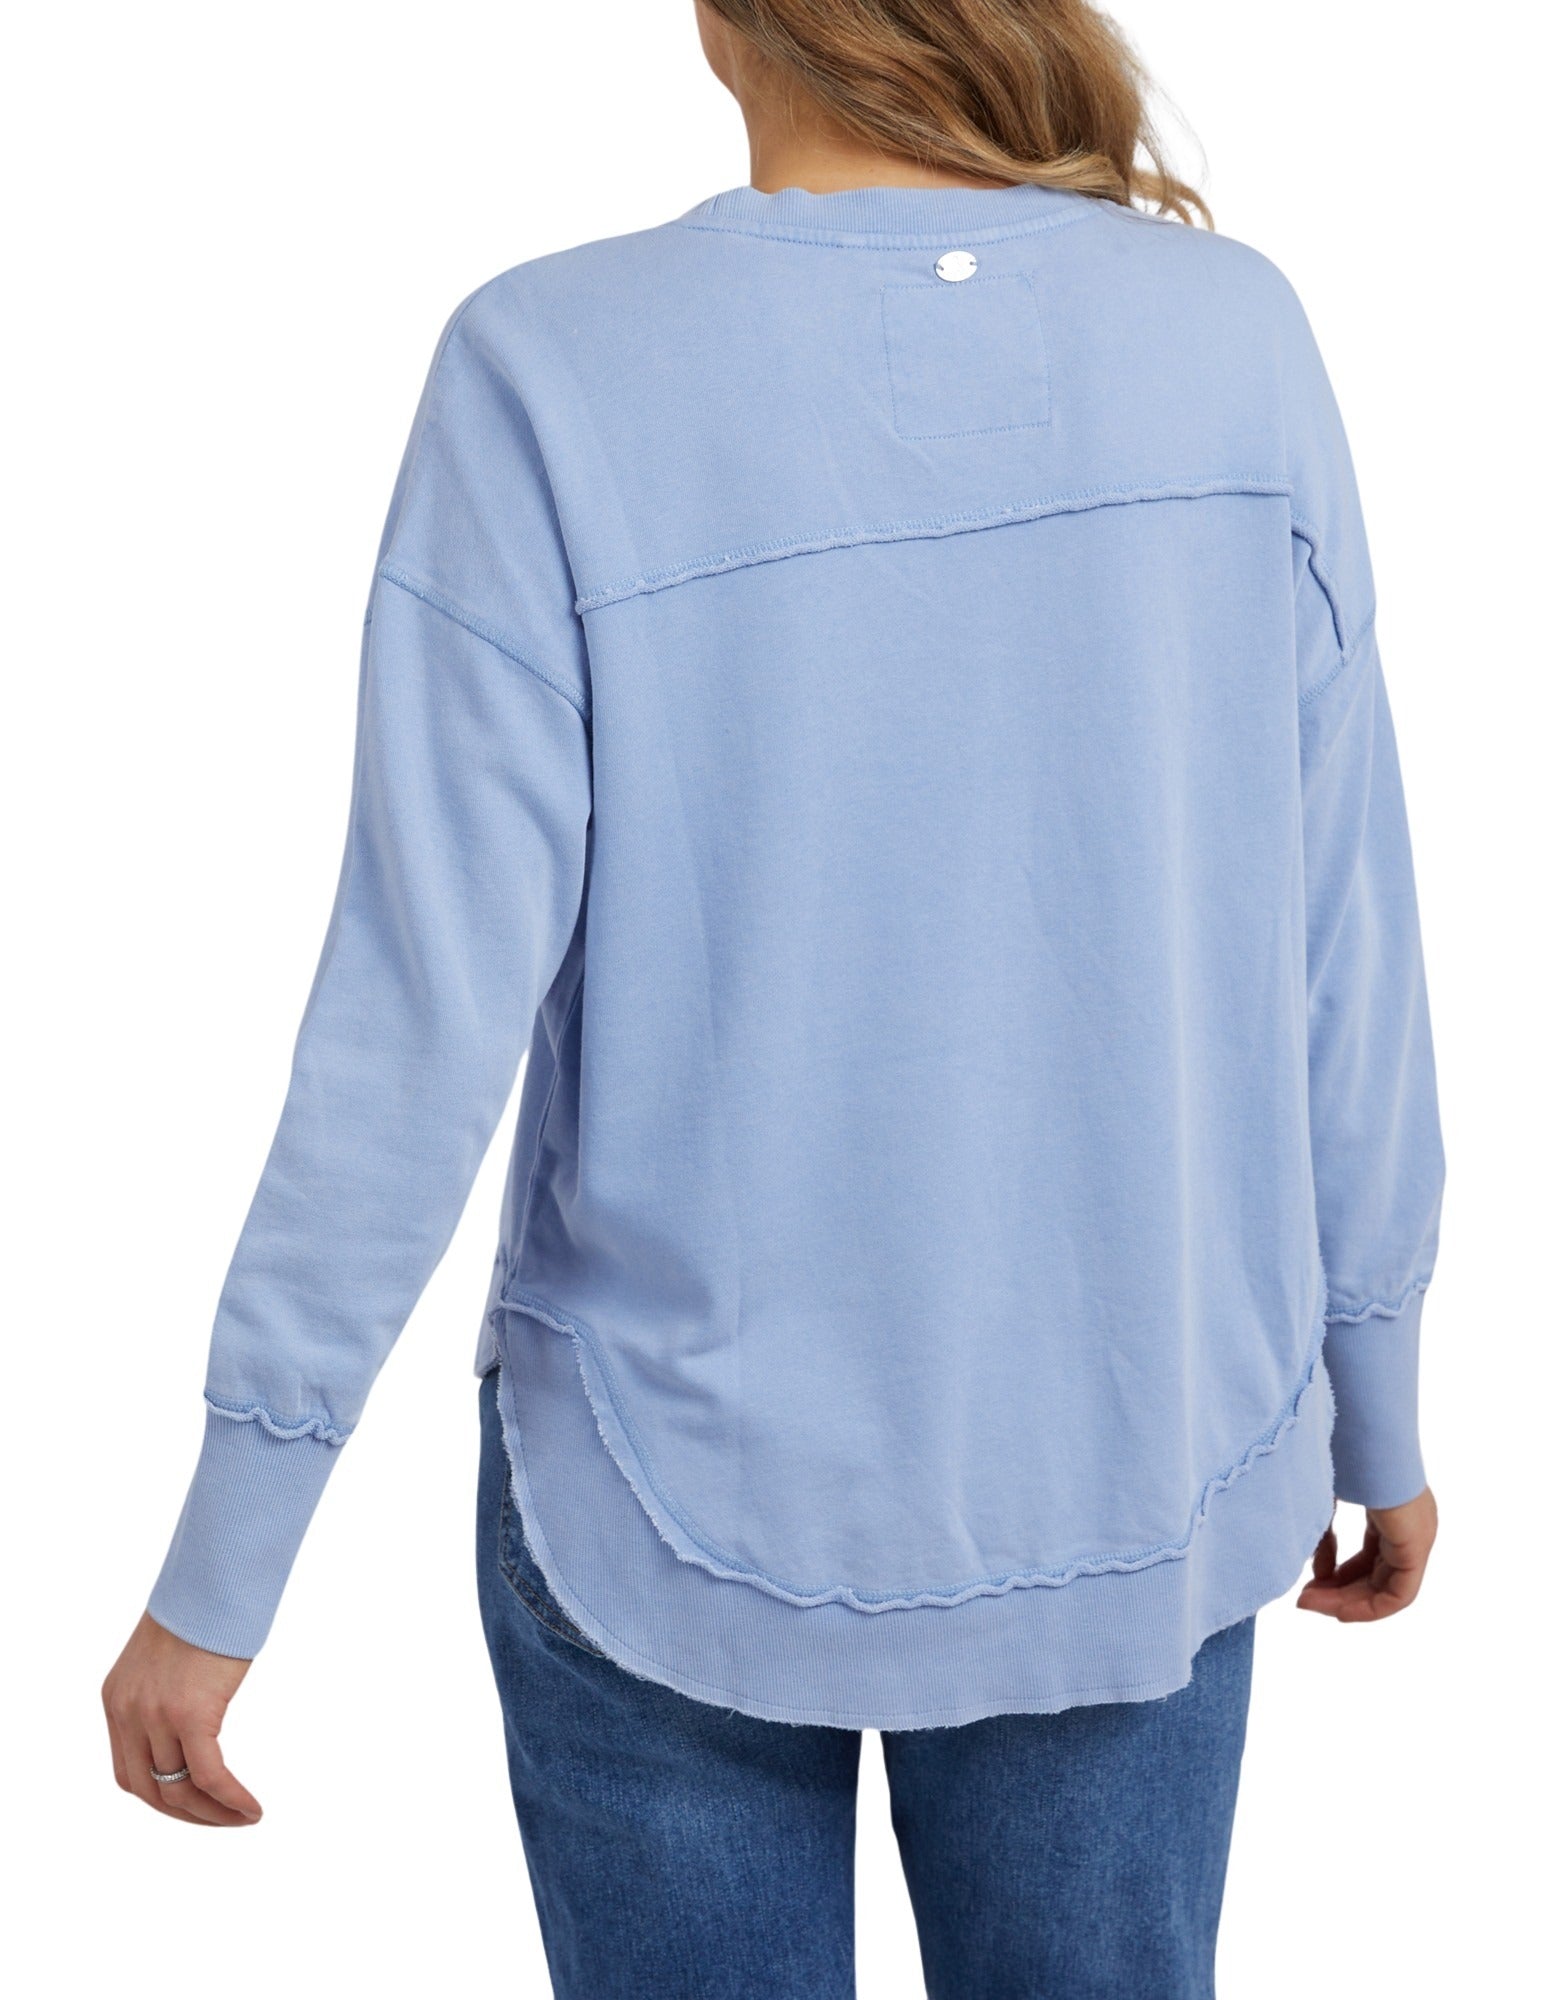 Foxwood Simplified Crew - Washed Blue